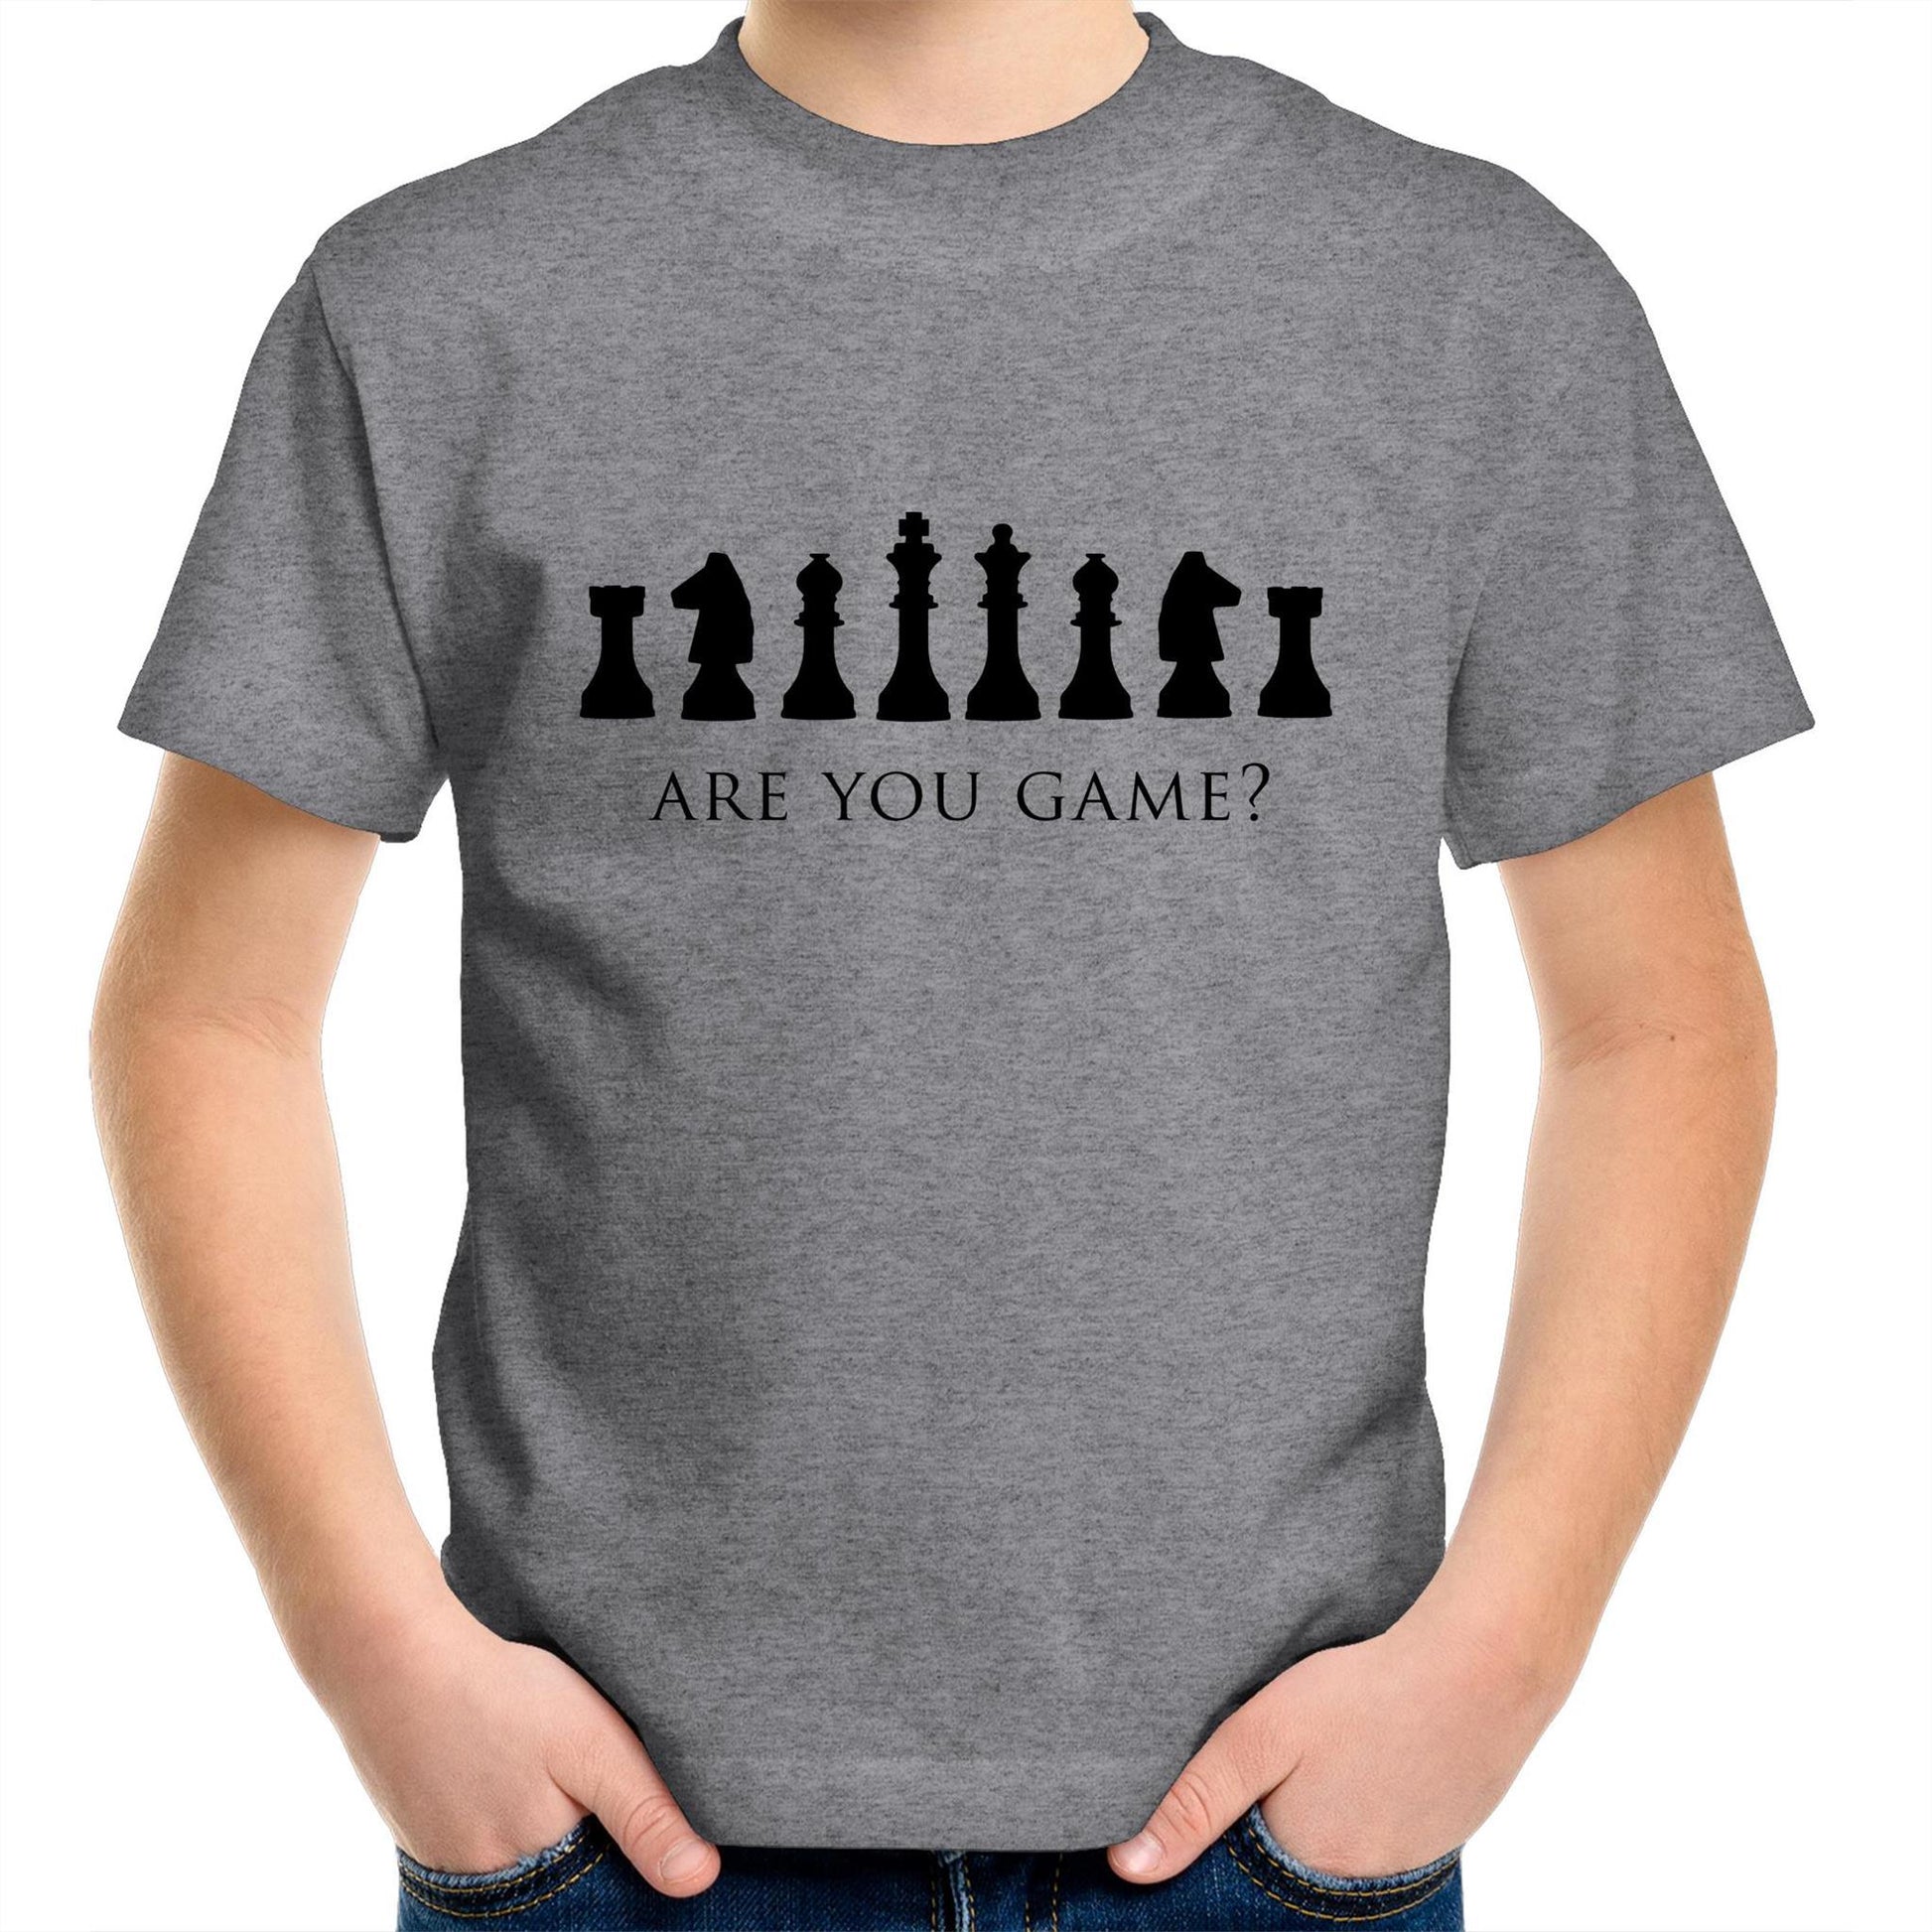 Are You Game - Kids Youth Crew T-shirt Grey Marle Kids Youth T-shirt Chess